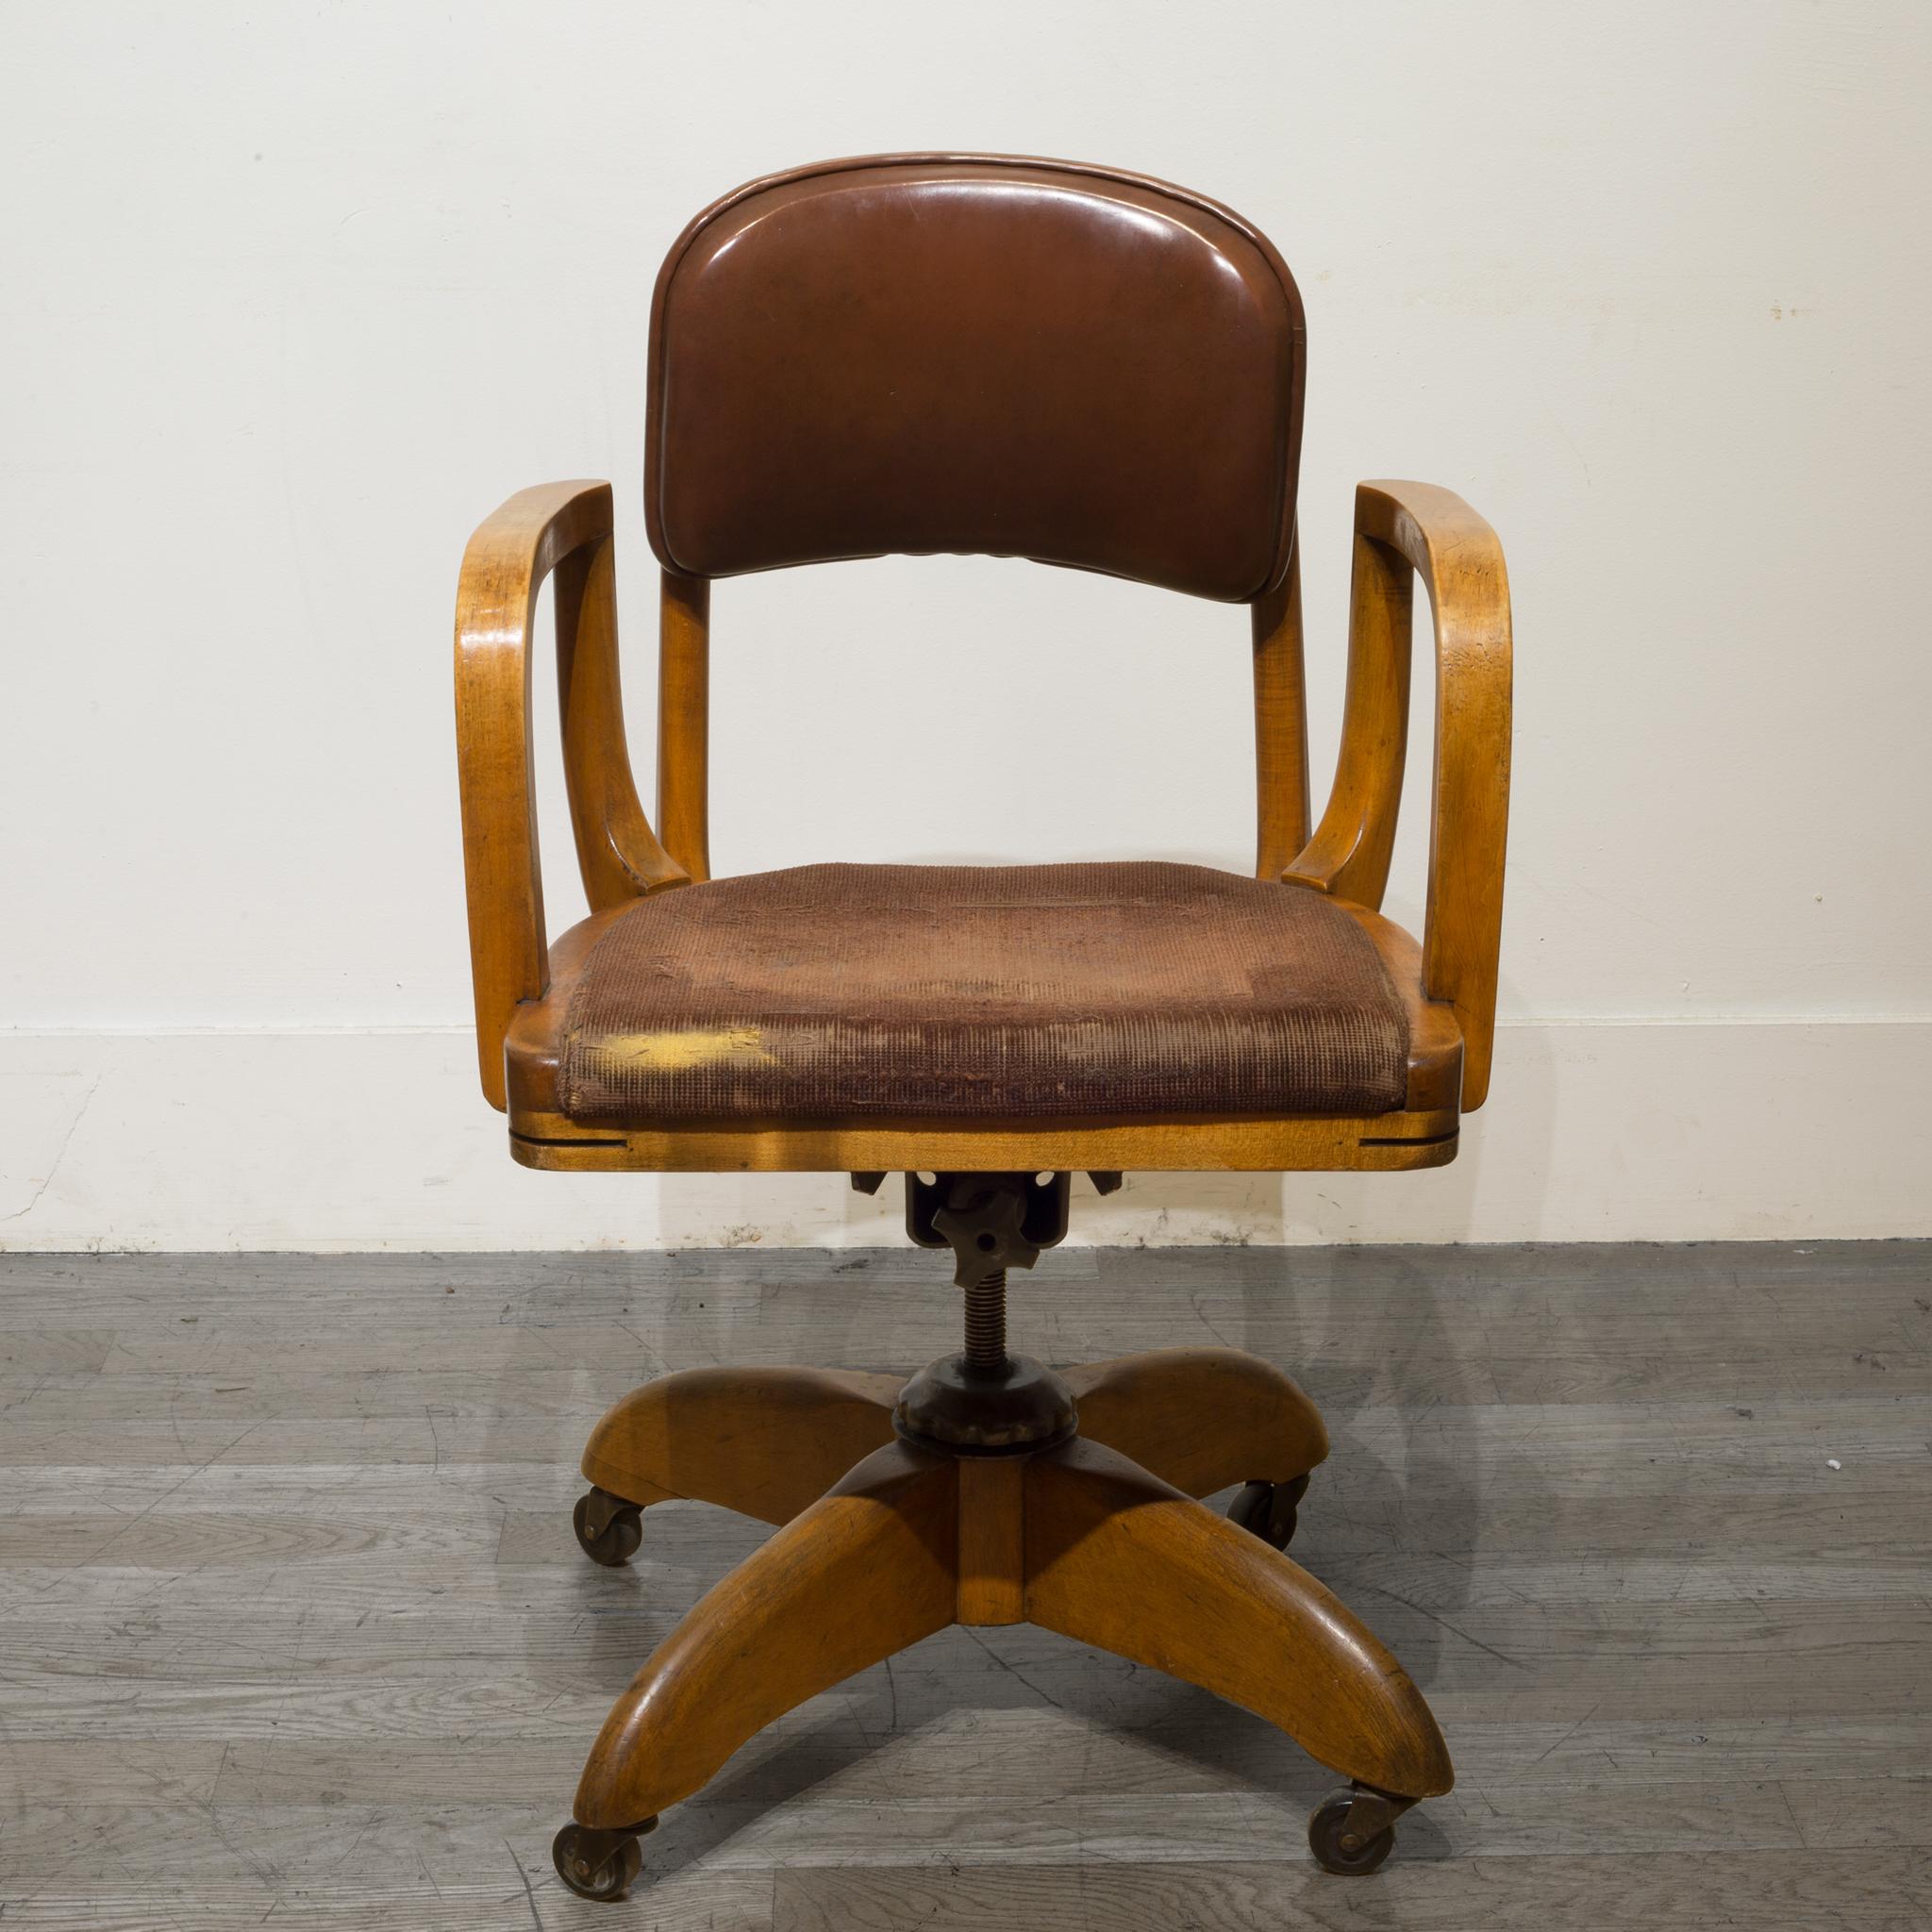 About

This is a solid oak, vinyl and fabric swivel desk chair with steel mechanisms. The chair's height is adjustable by spinning the chair up or down. The backrest reclines and the tension can be adjusted. The height of the backrest can be raised